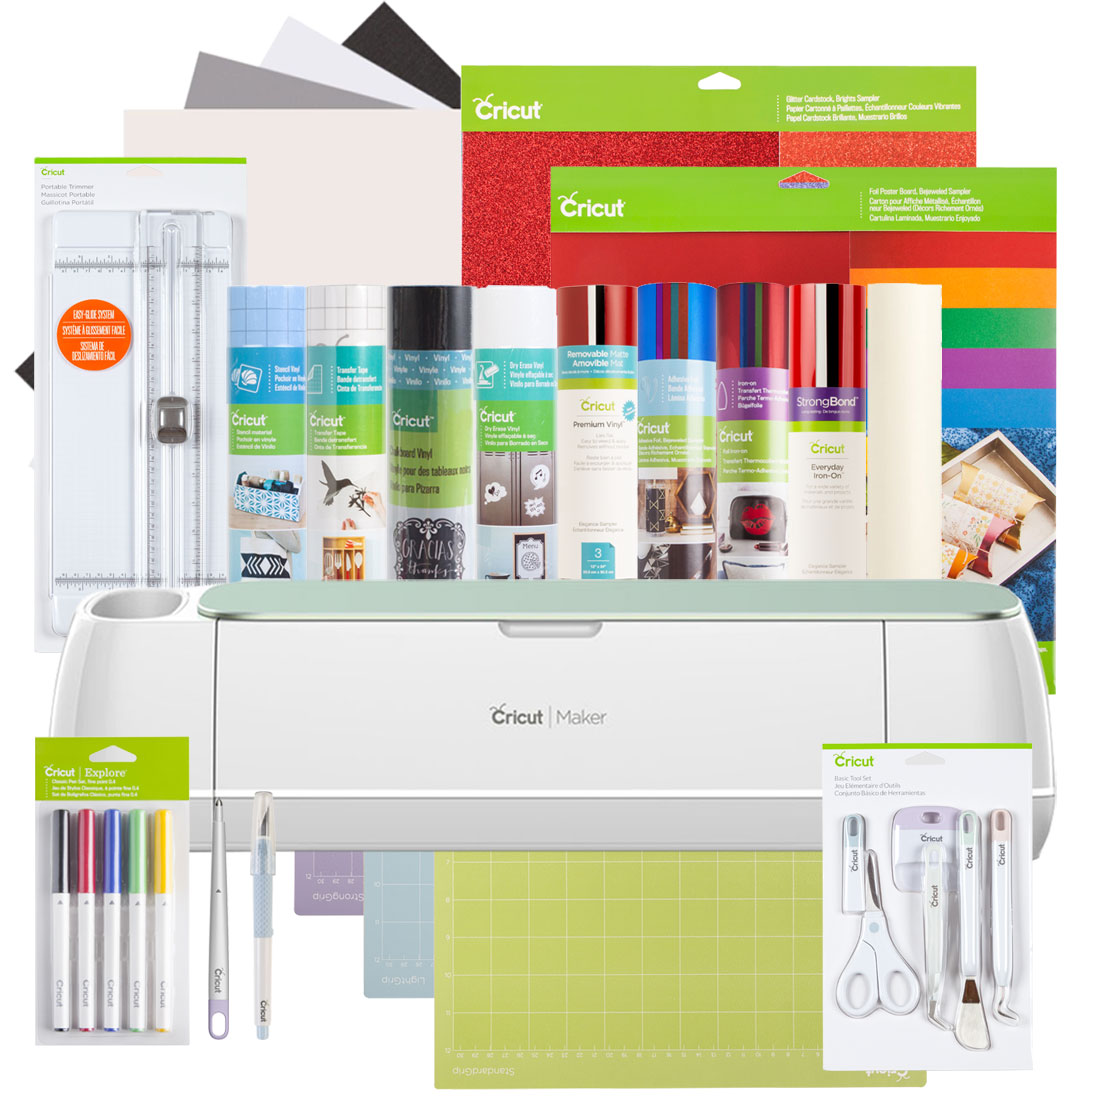 Cricut Maker 3: Our Complete Guide and Review! – Sustain My Craft